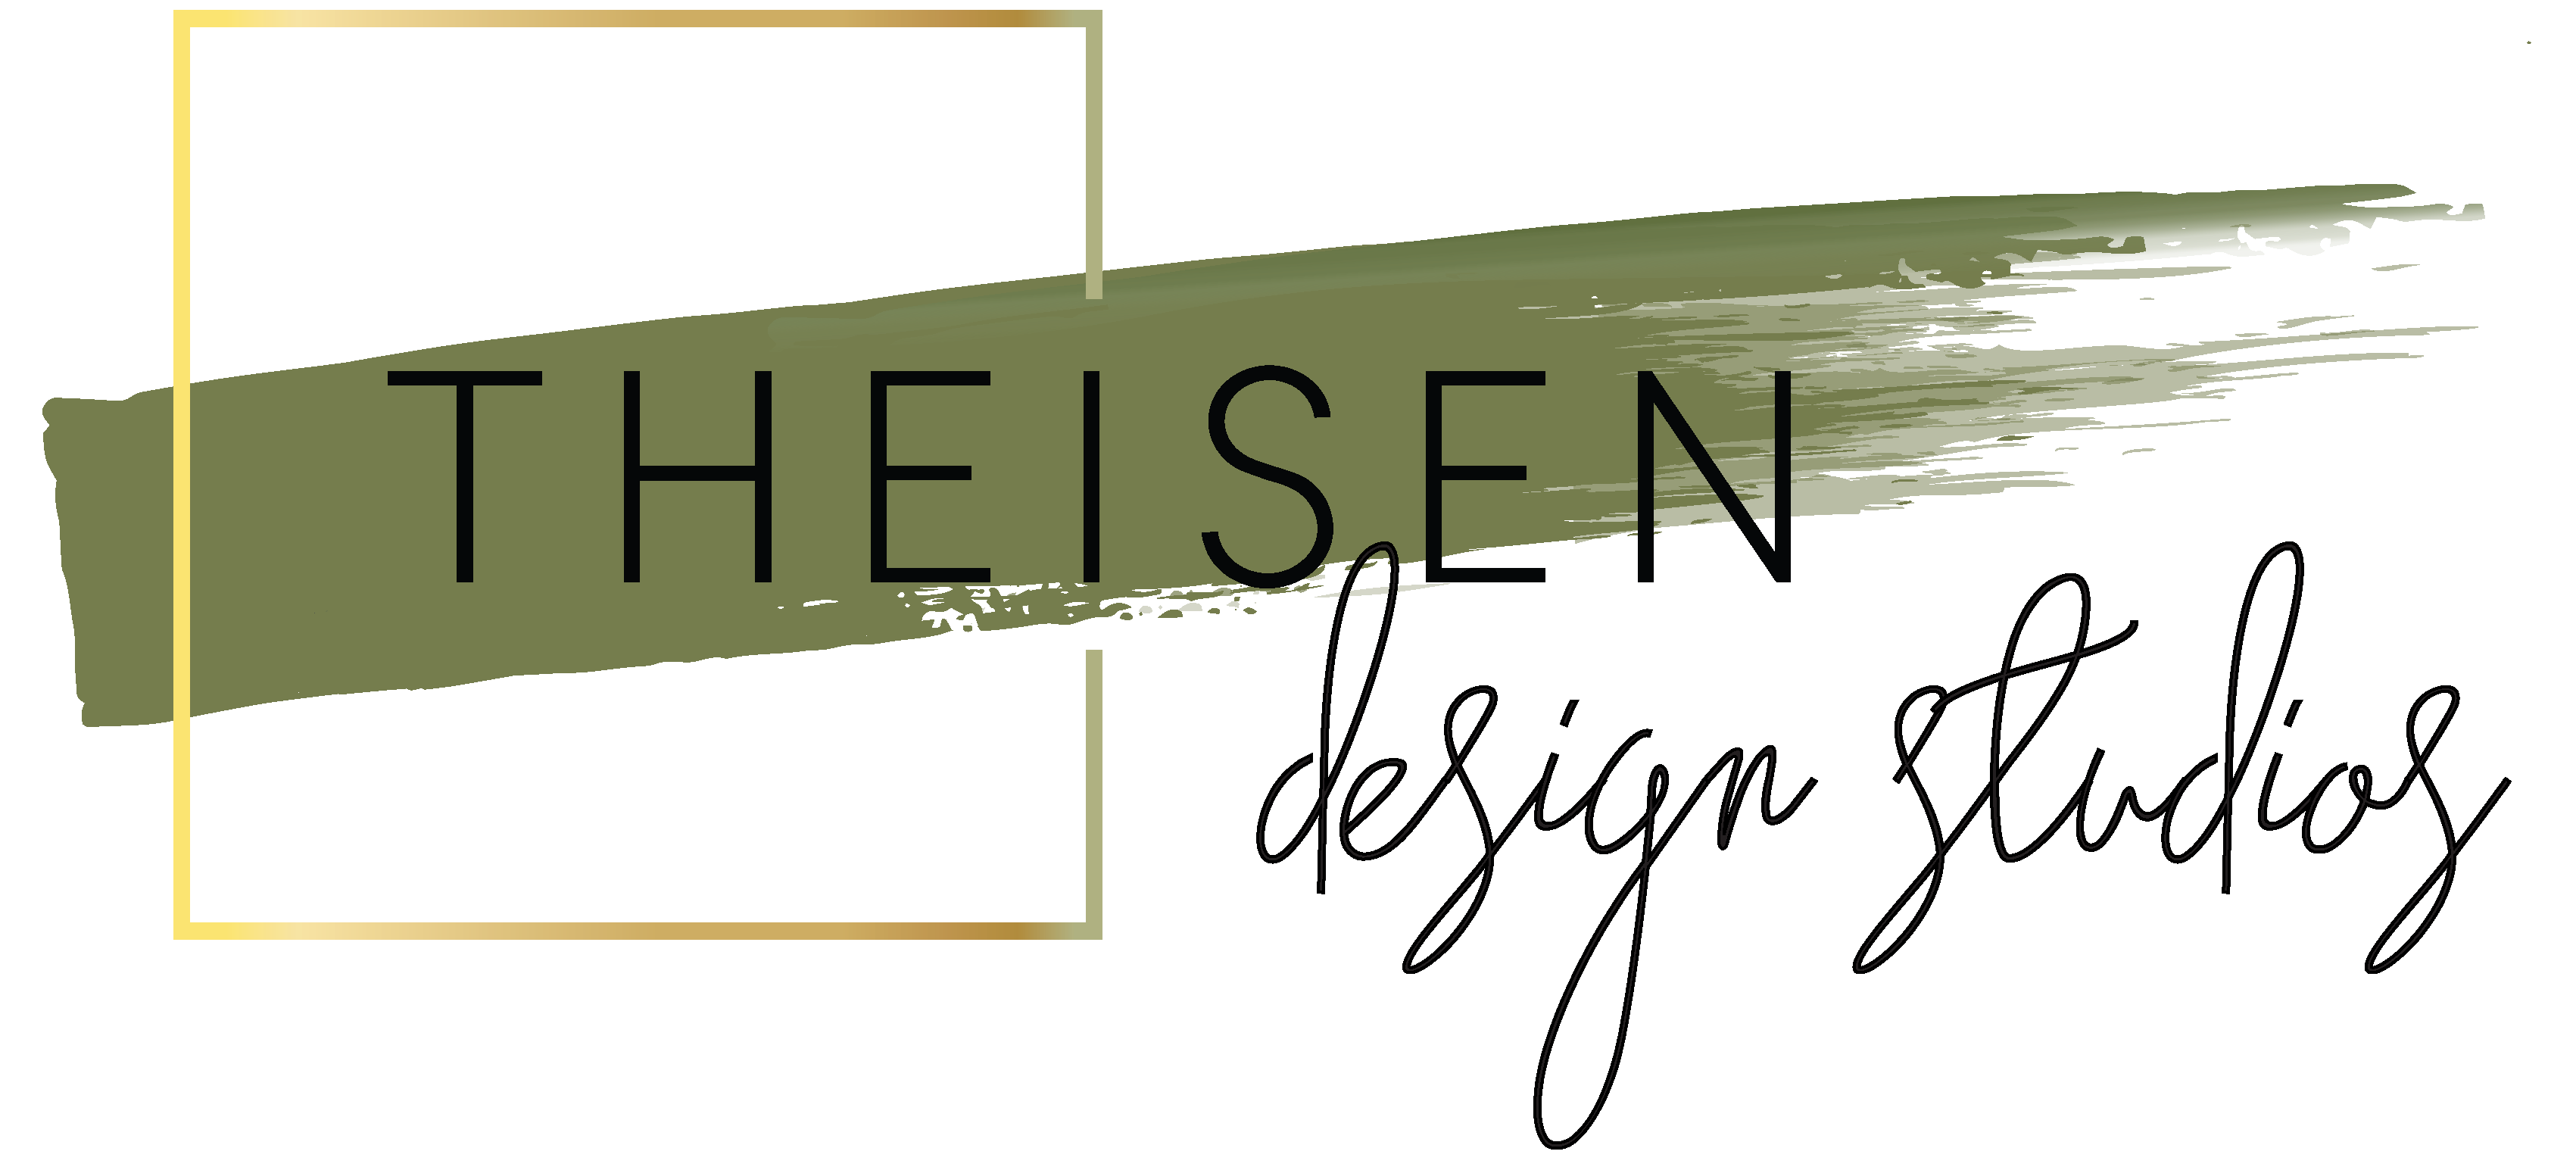 Theisen Design Studios Logo - Interior Design services + solutions to make your space work for you